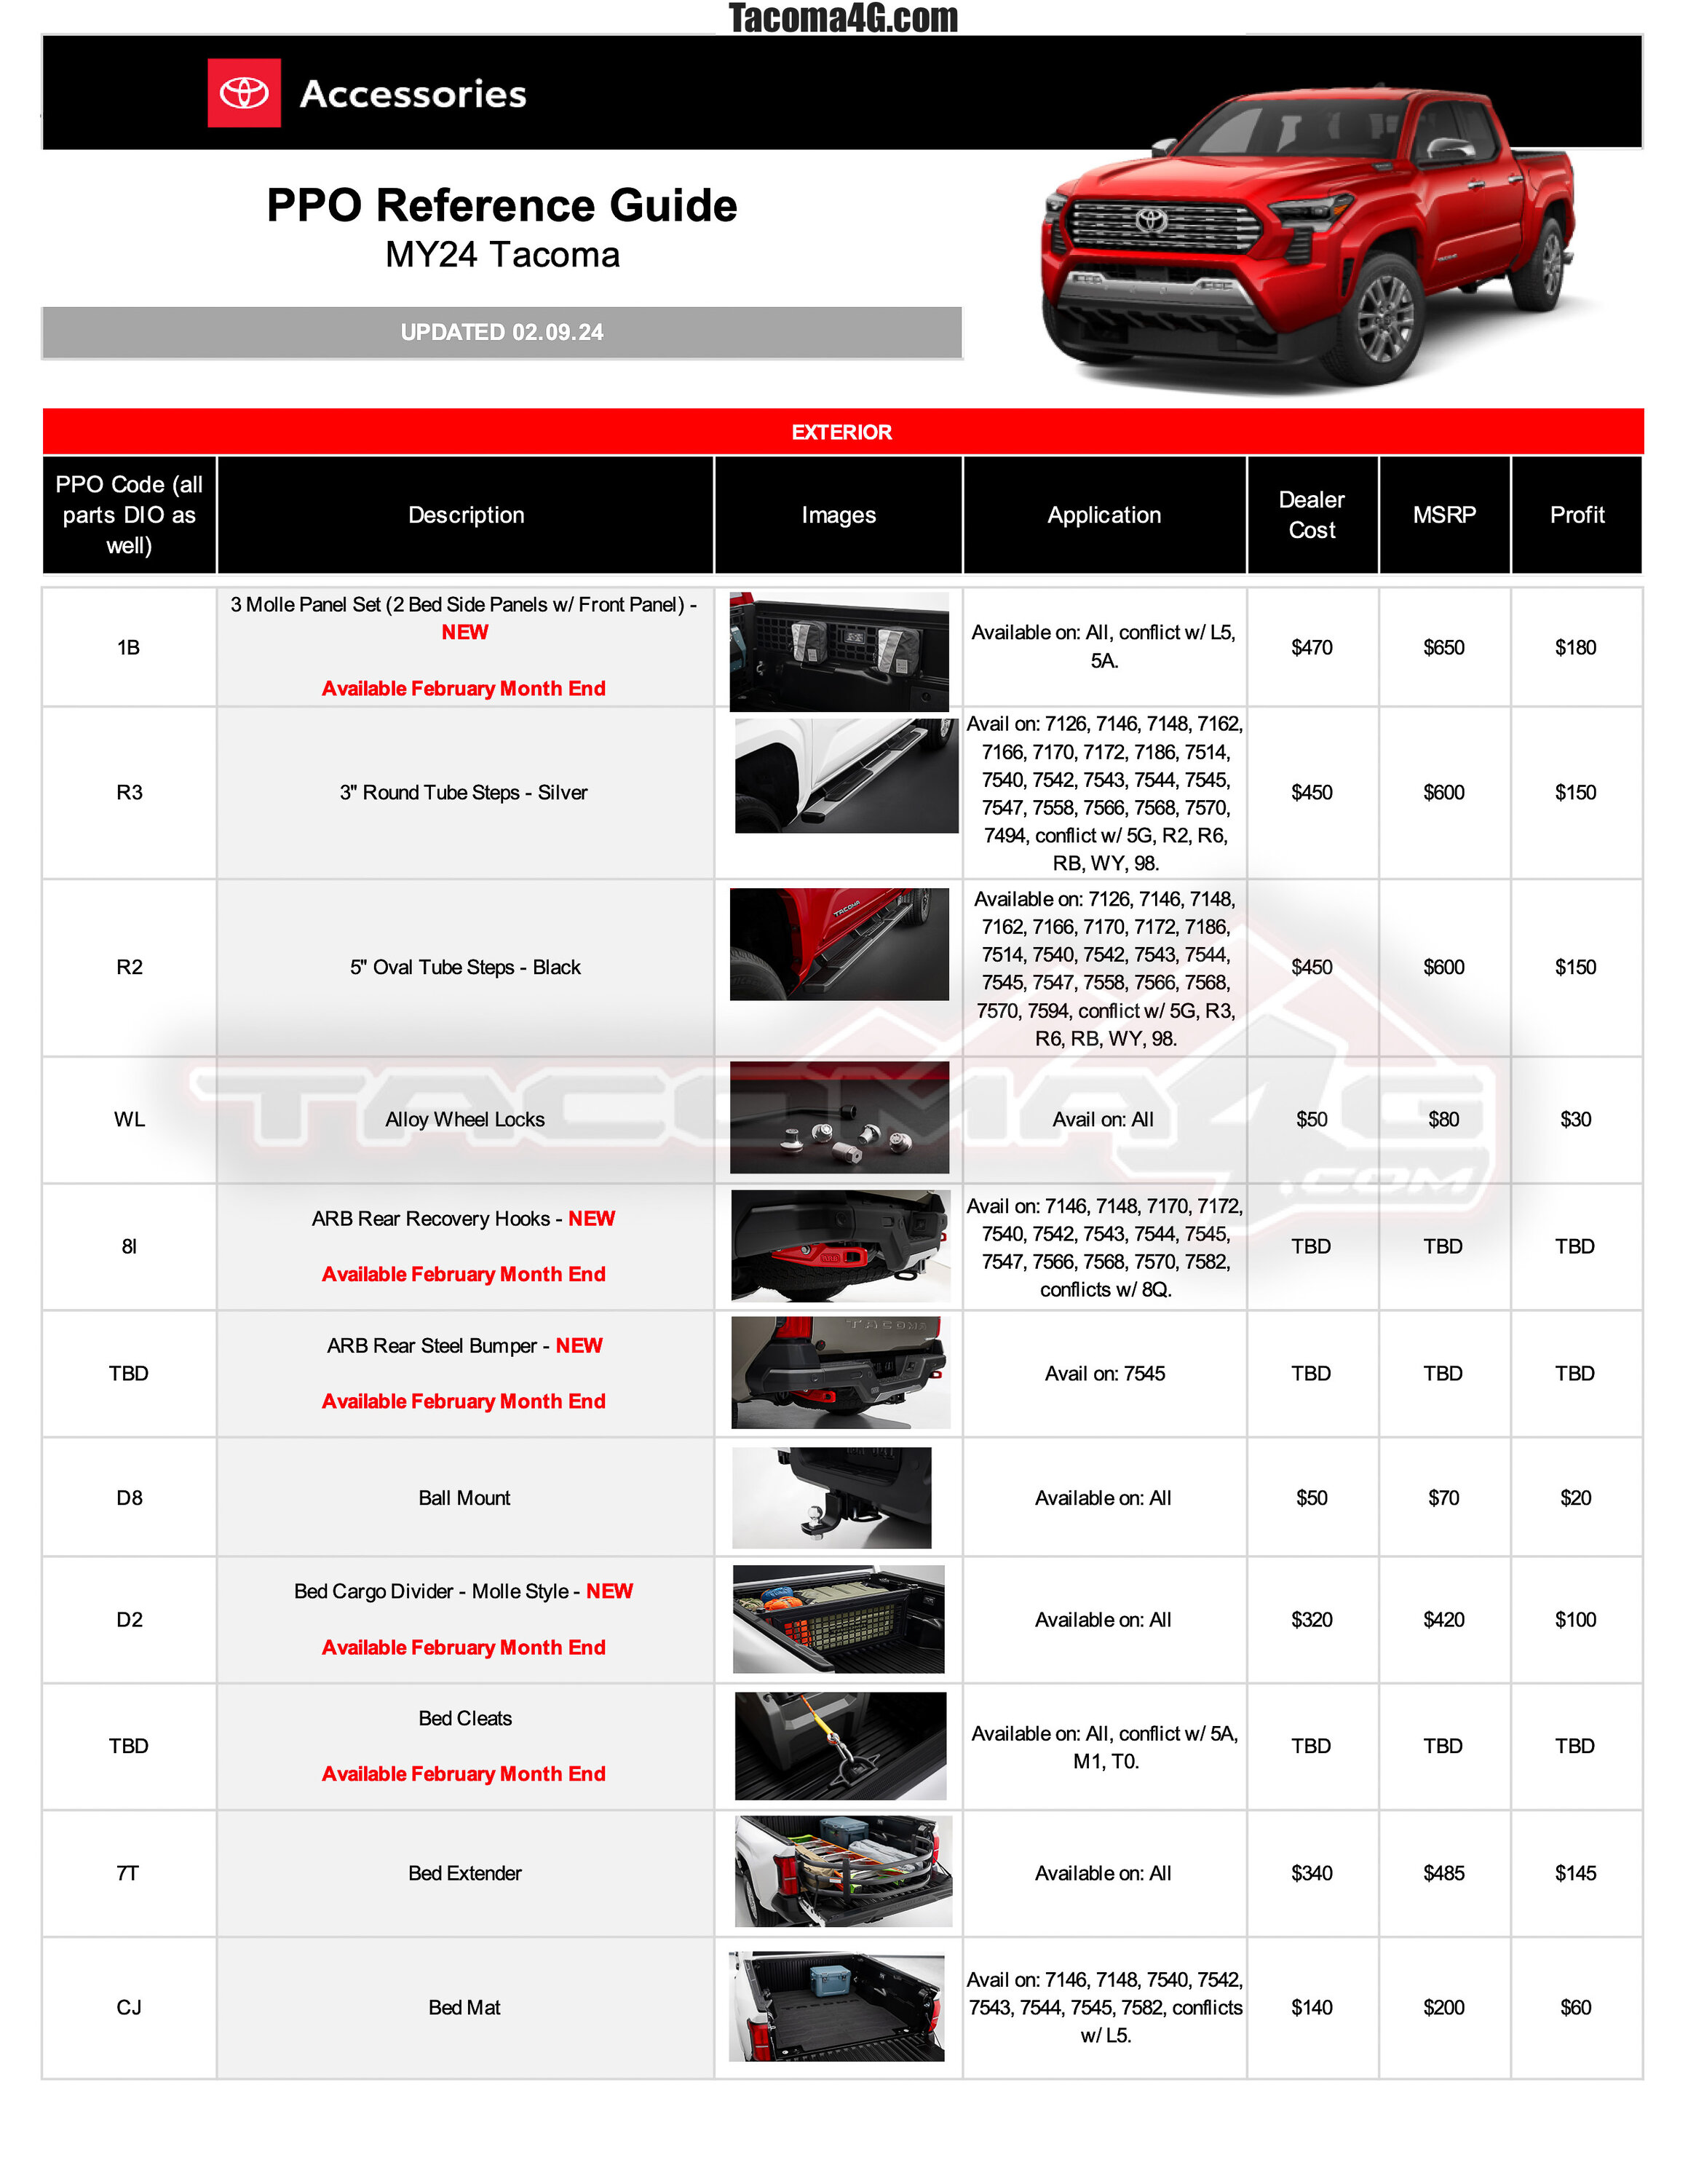 2024 Tacoma 2024 Tacoma Post-Production Options (PPO) Guide - OEM / TRD Accessories Parts + Pricing!  [UPDATED 4-24-24] 2024 Tacoma PPO Accessories Guide_02.09.24-1